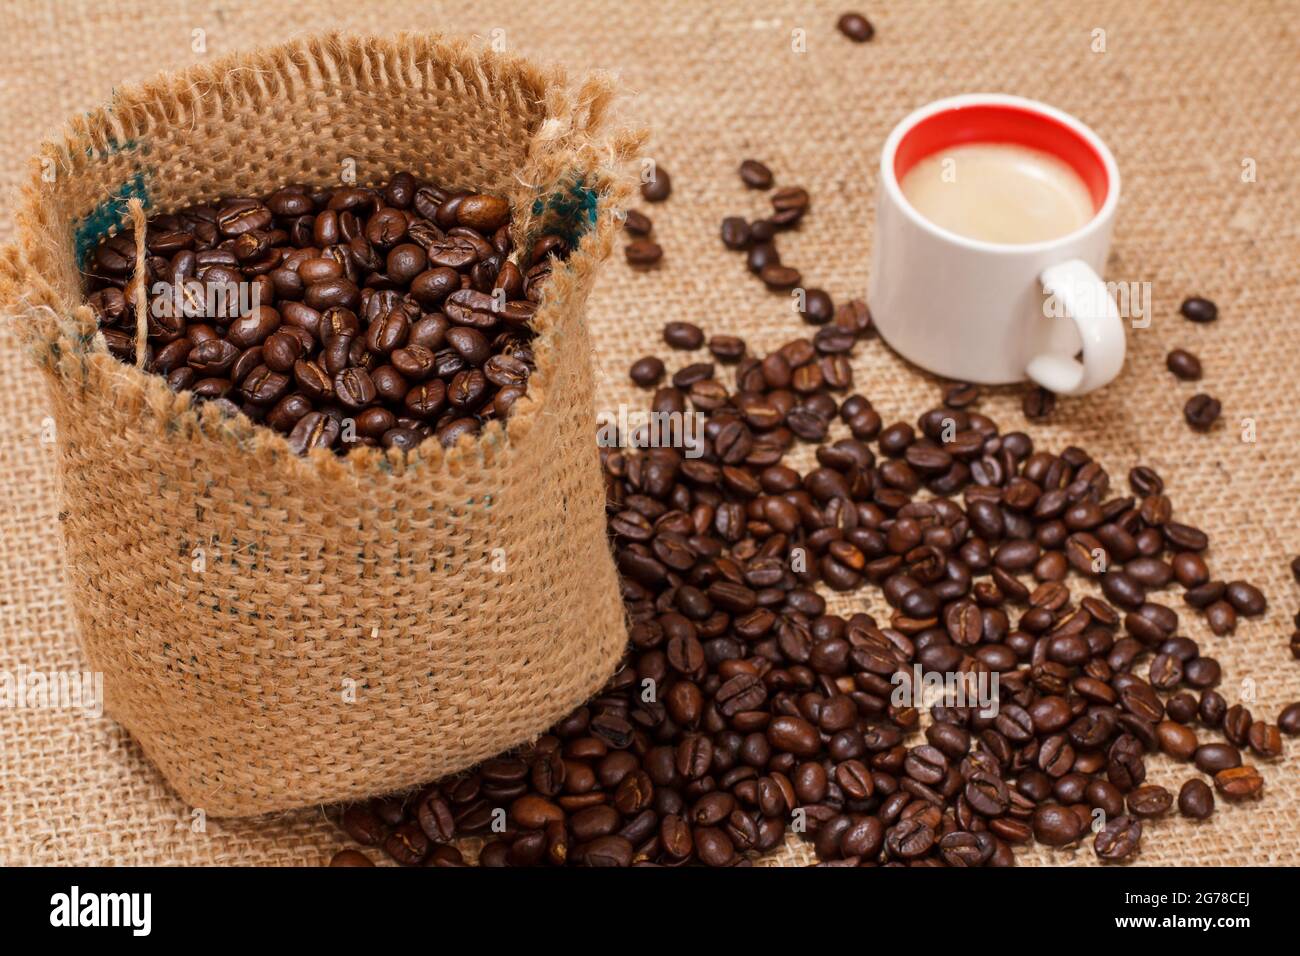 Cup of coffee and roasted coffee beans in a canvas sack. Stock Photo